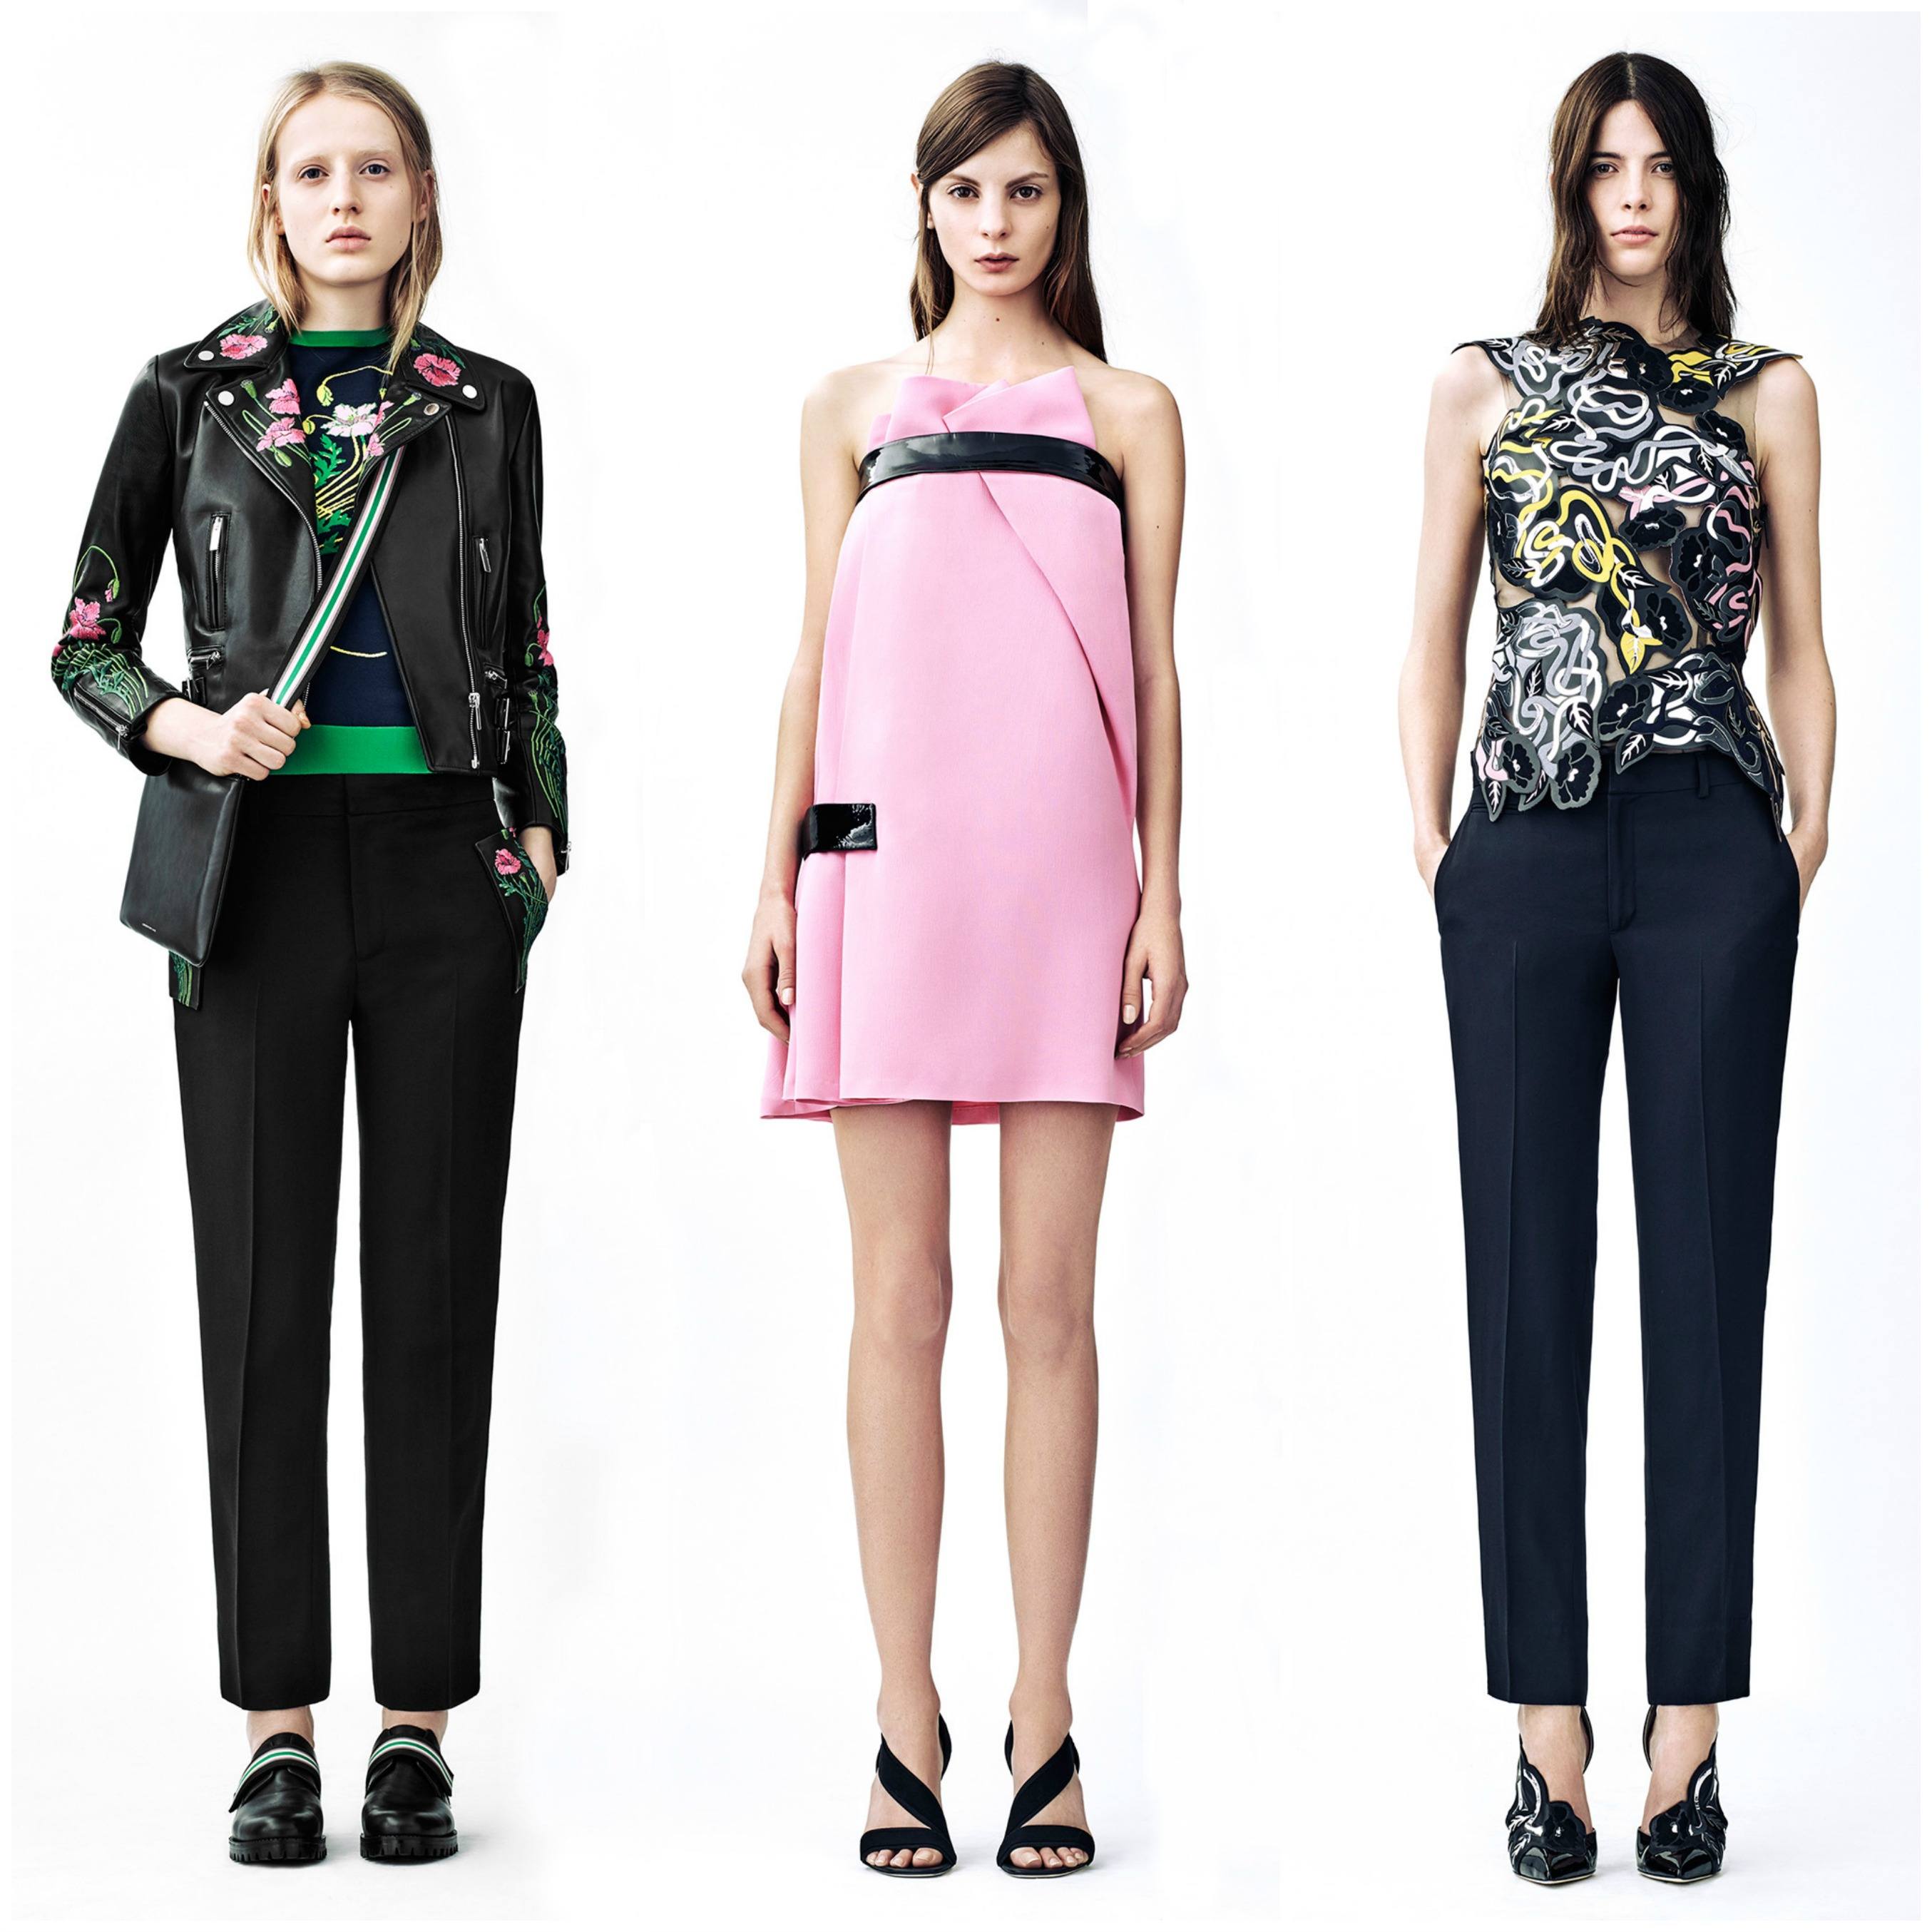 Christopher Kane's collection mixed sweet and tough